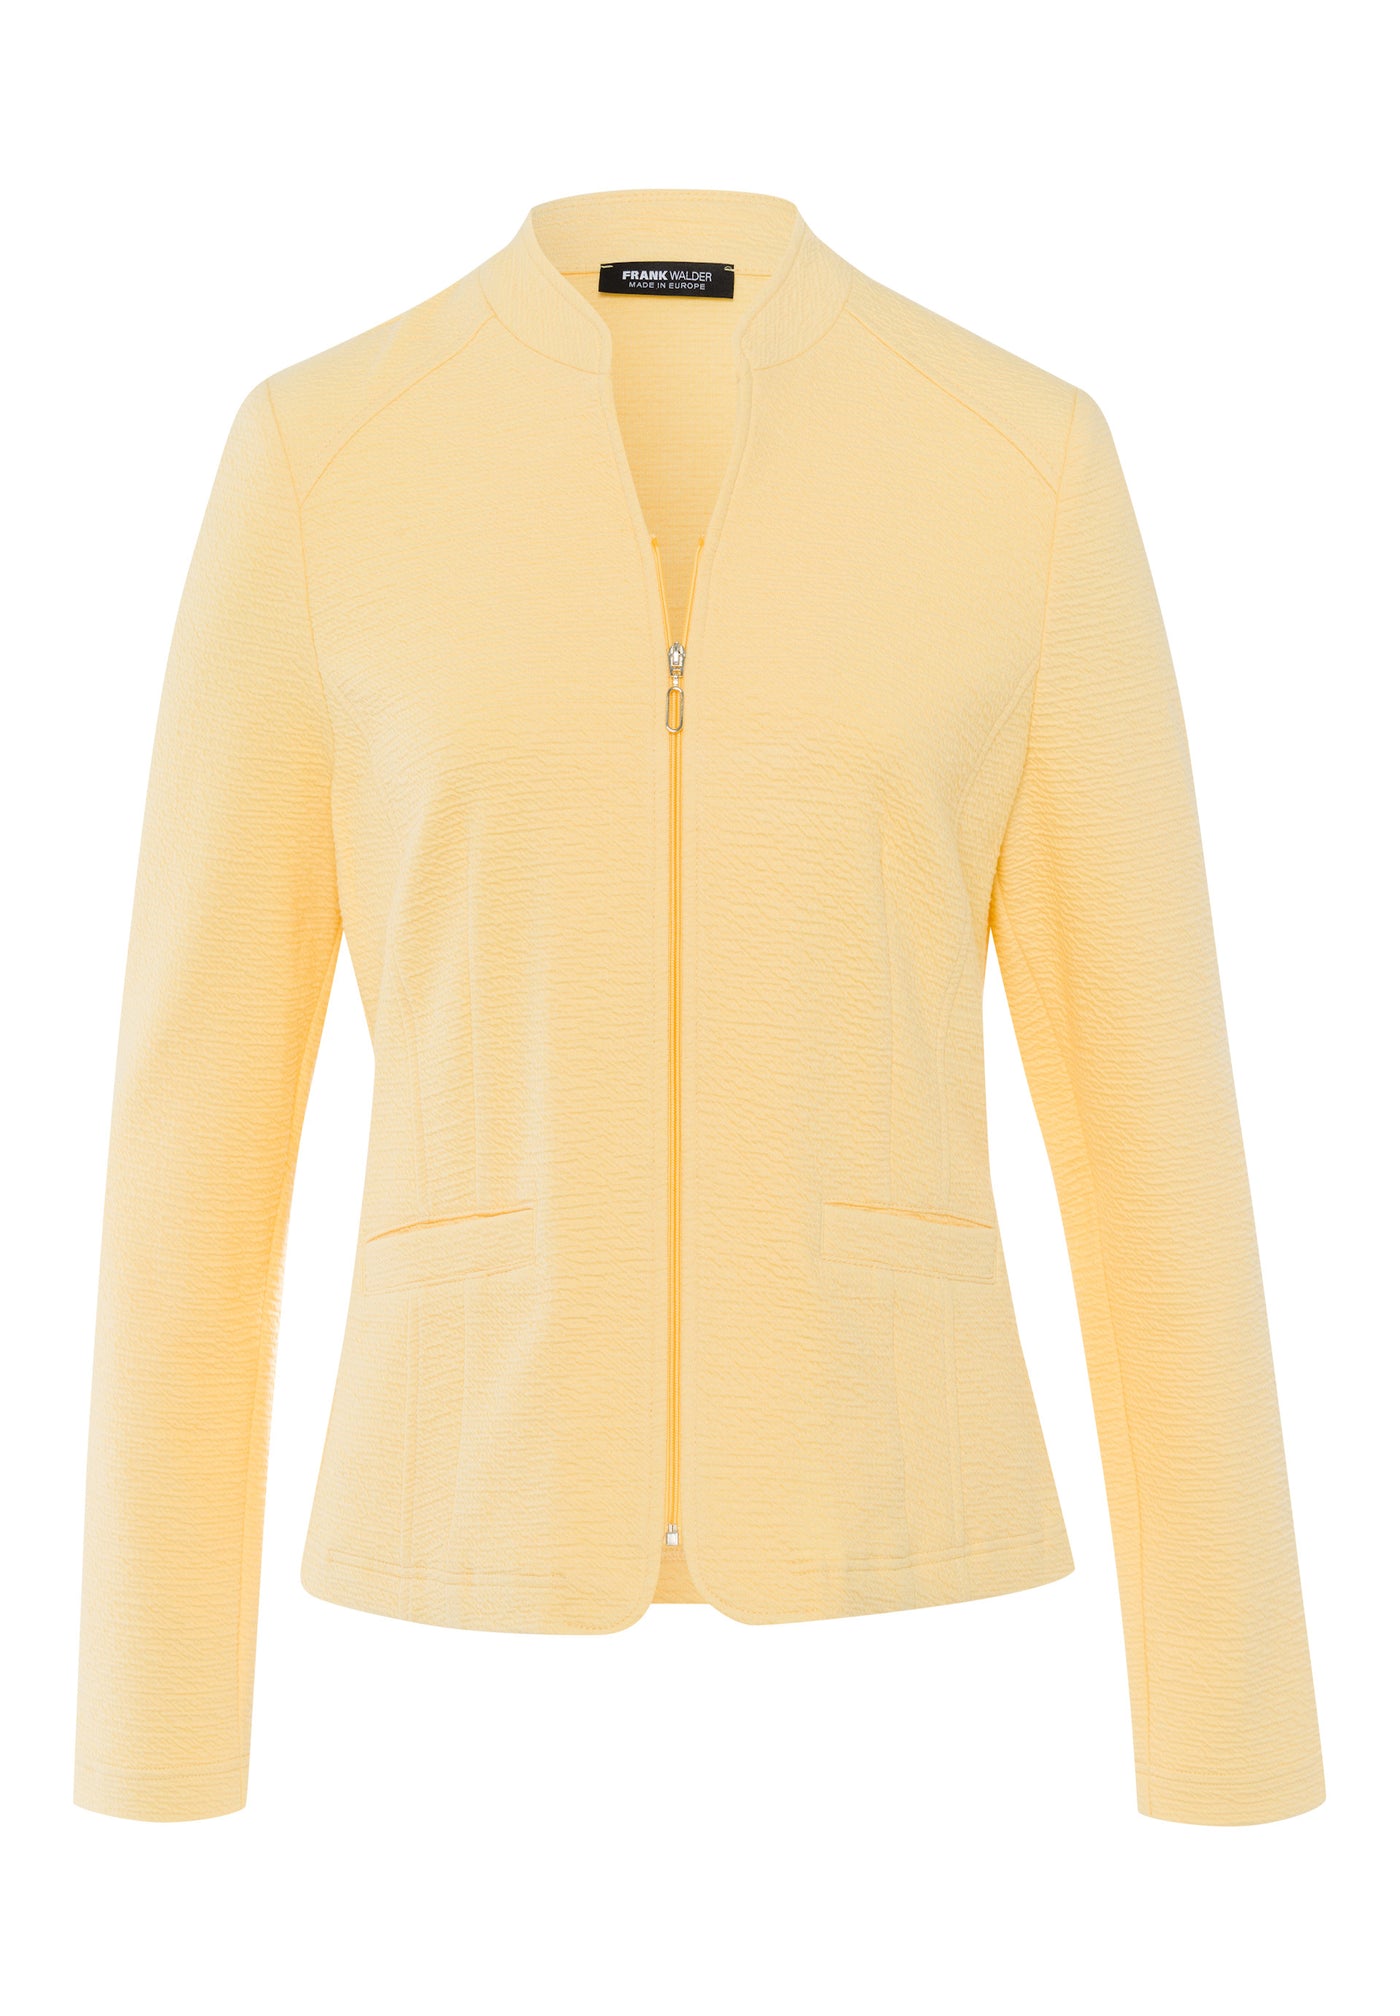 Yellow Zip Up Jacket With Pockets